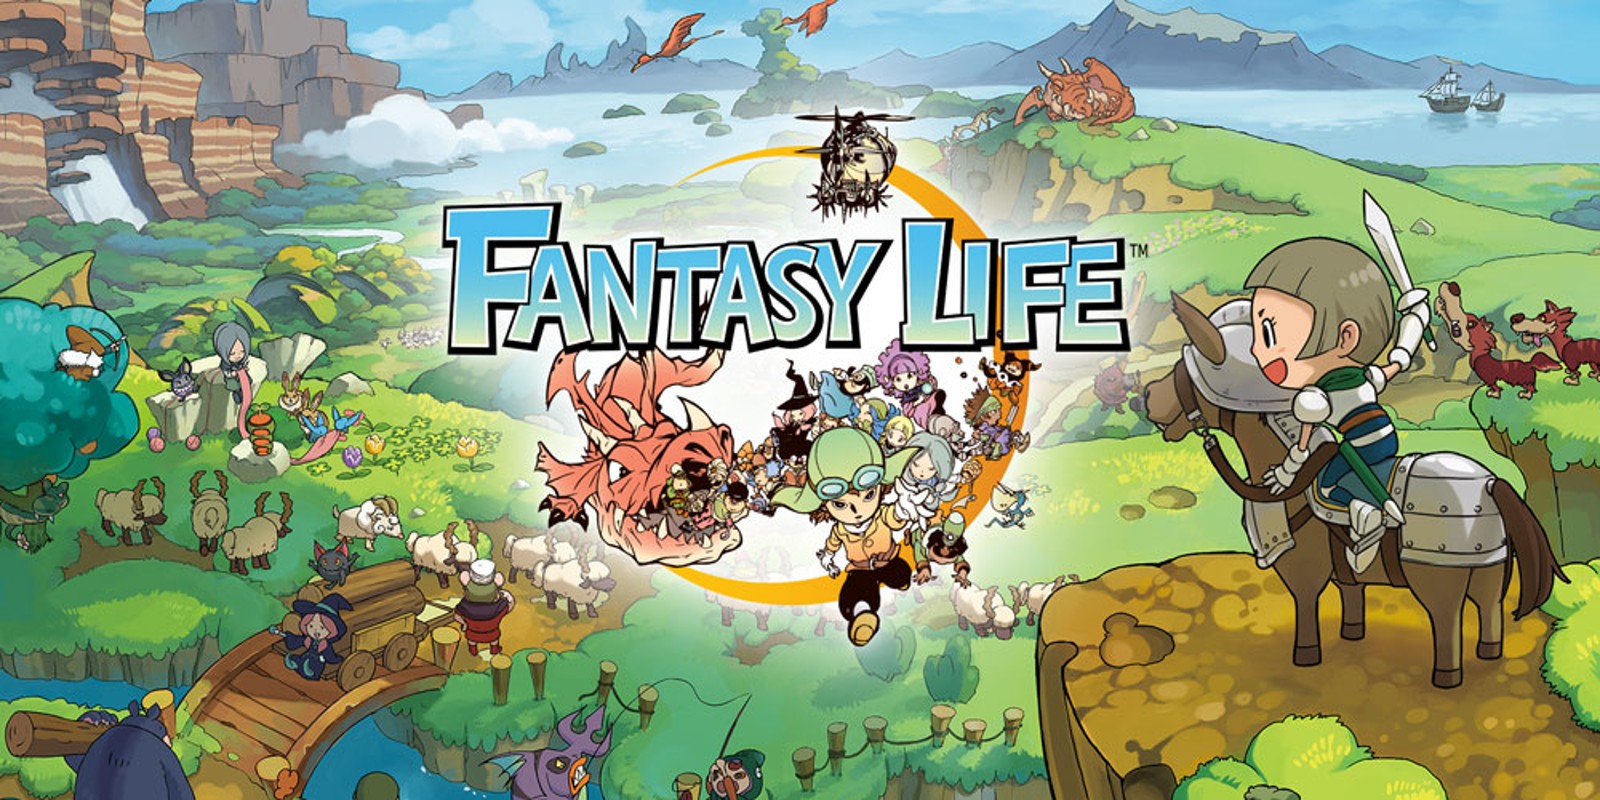 official promotional art for Fantasy Life, which features the logo in the center of a landscape of the East Grassy Plains, which has green hills and many characters from the game in various places. the logo features the title in blocky text, a crescent moon shape, and a bunch of characters advancing towards the viewer, with a red Napdragon off to the left and an airship up above the title